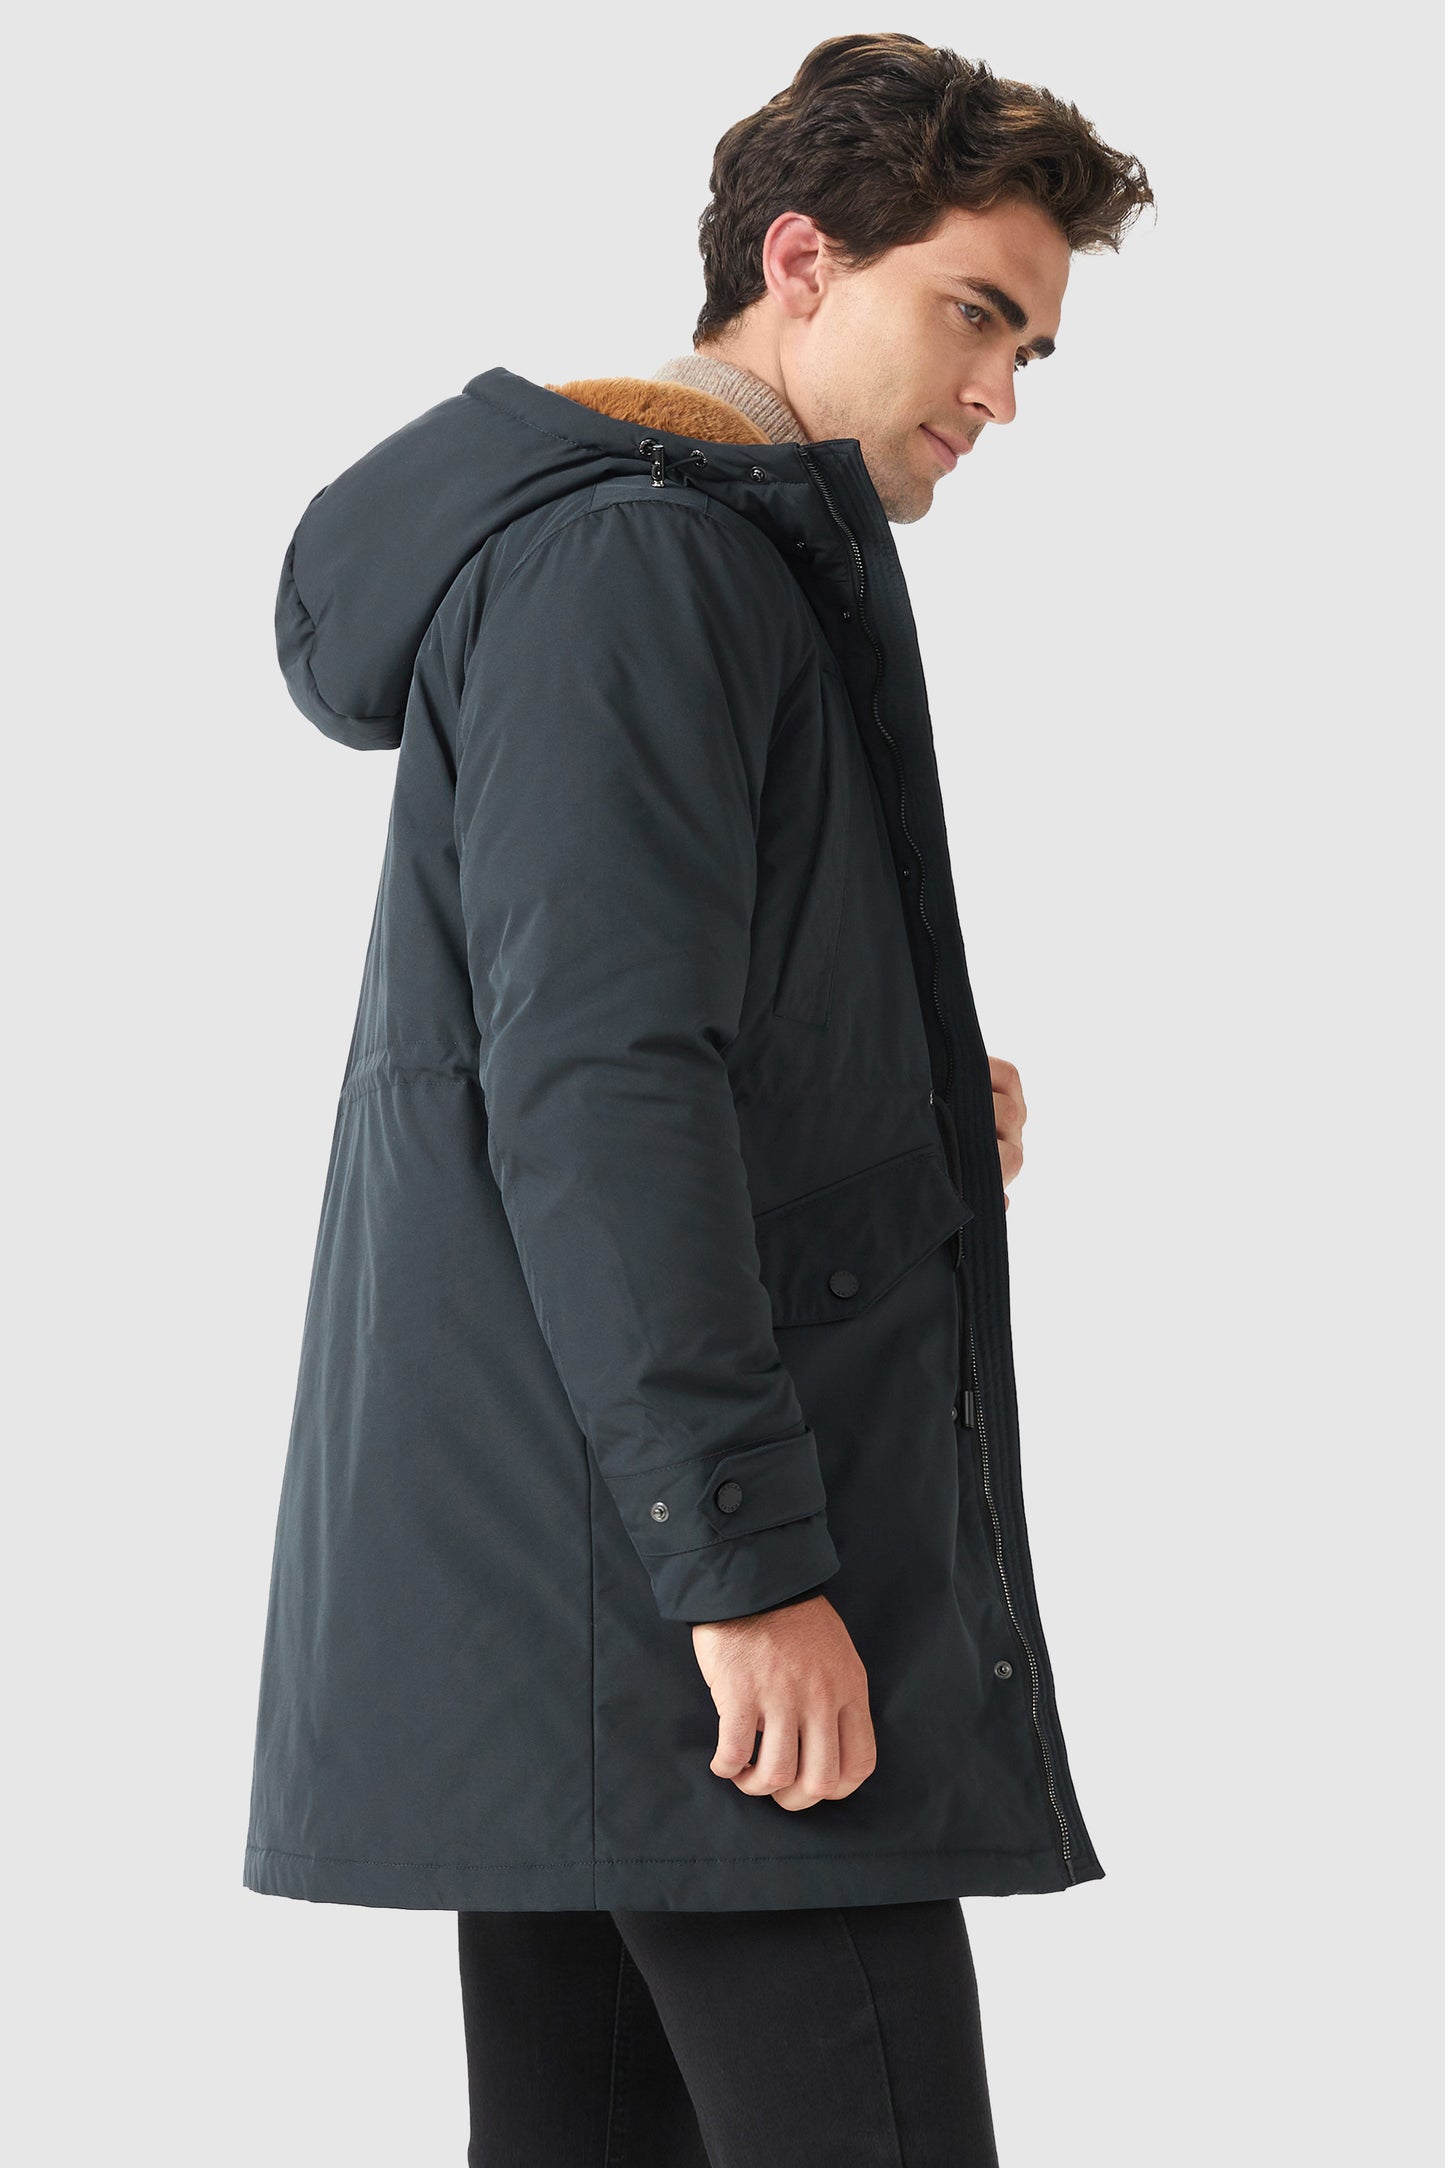 Winter Thicken Parka Jacket with Fleece Lined